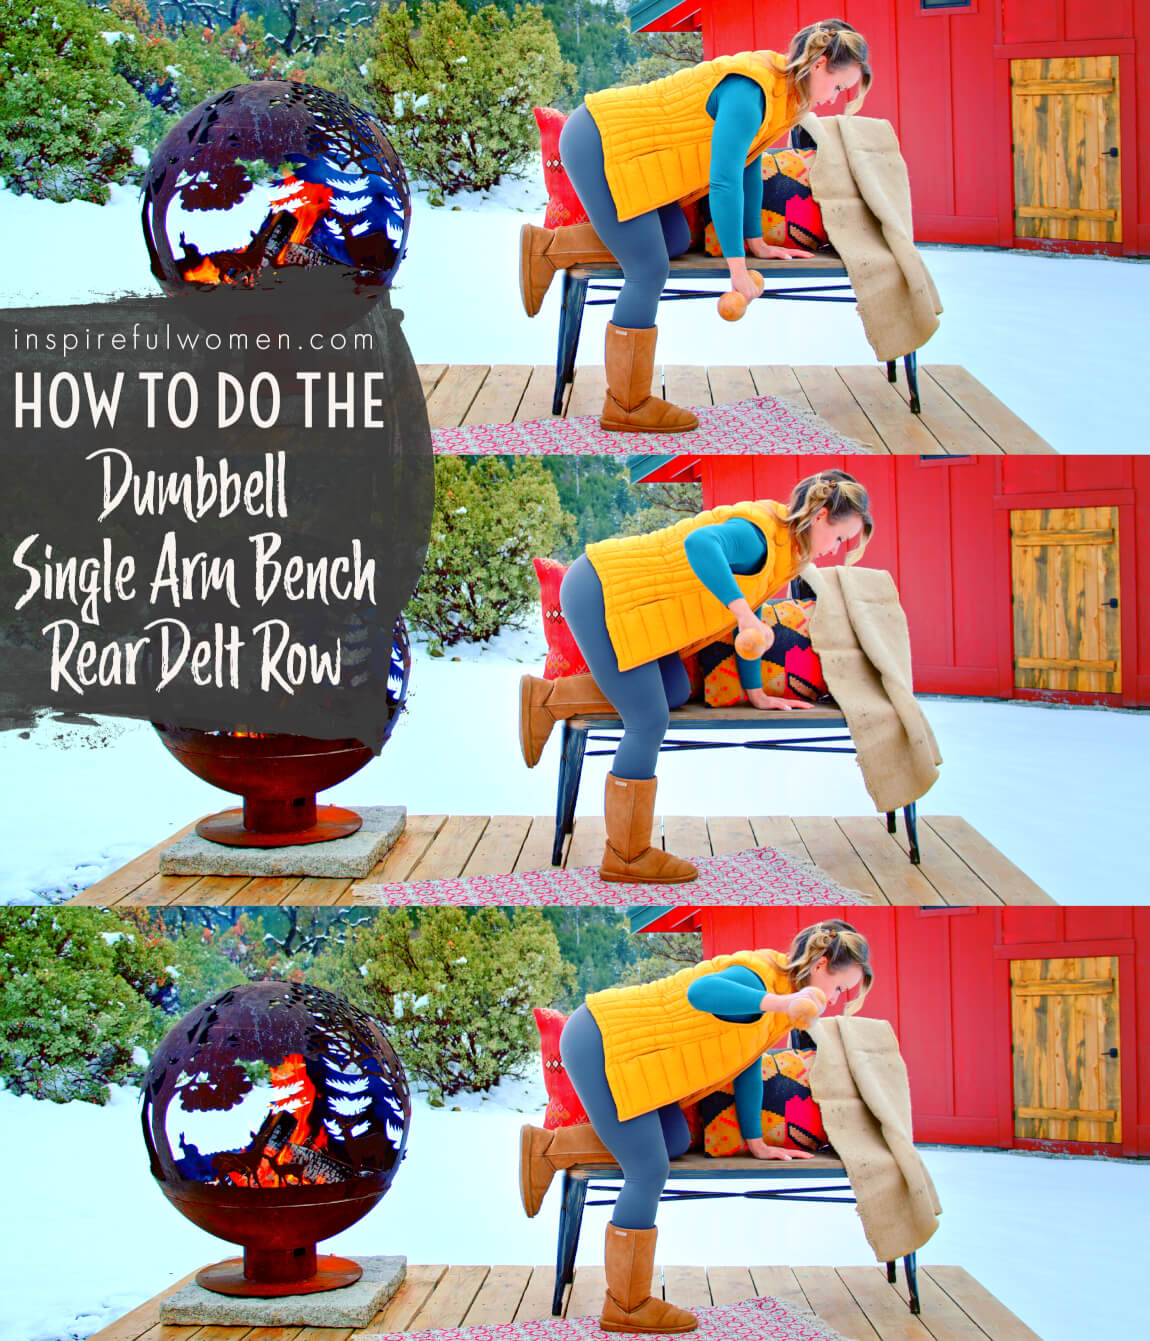 how-to-do-dumbbell-single-arm-bench-near-delt-row-shoulder-workout-at-home-women-40-plus